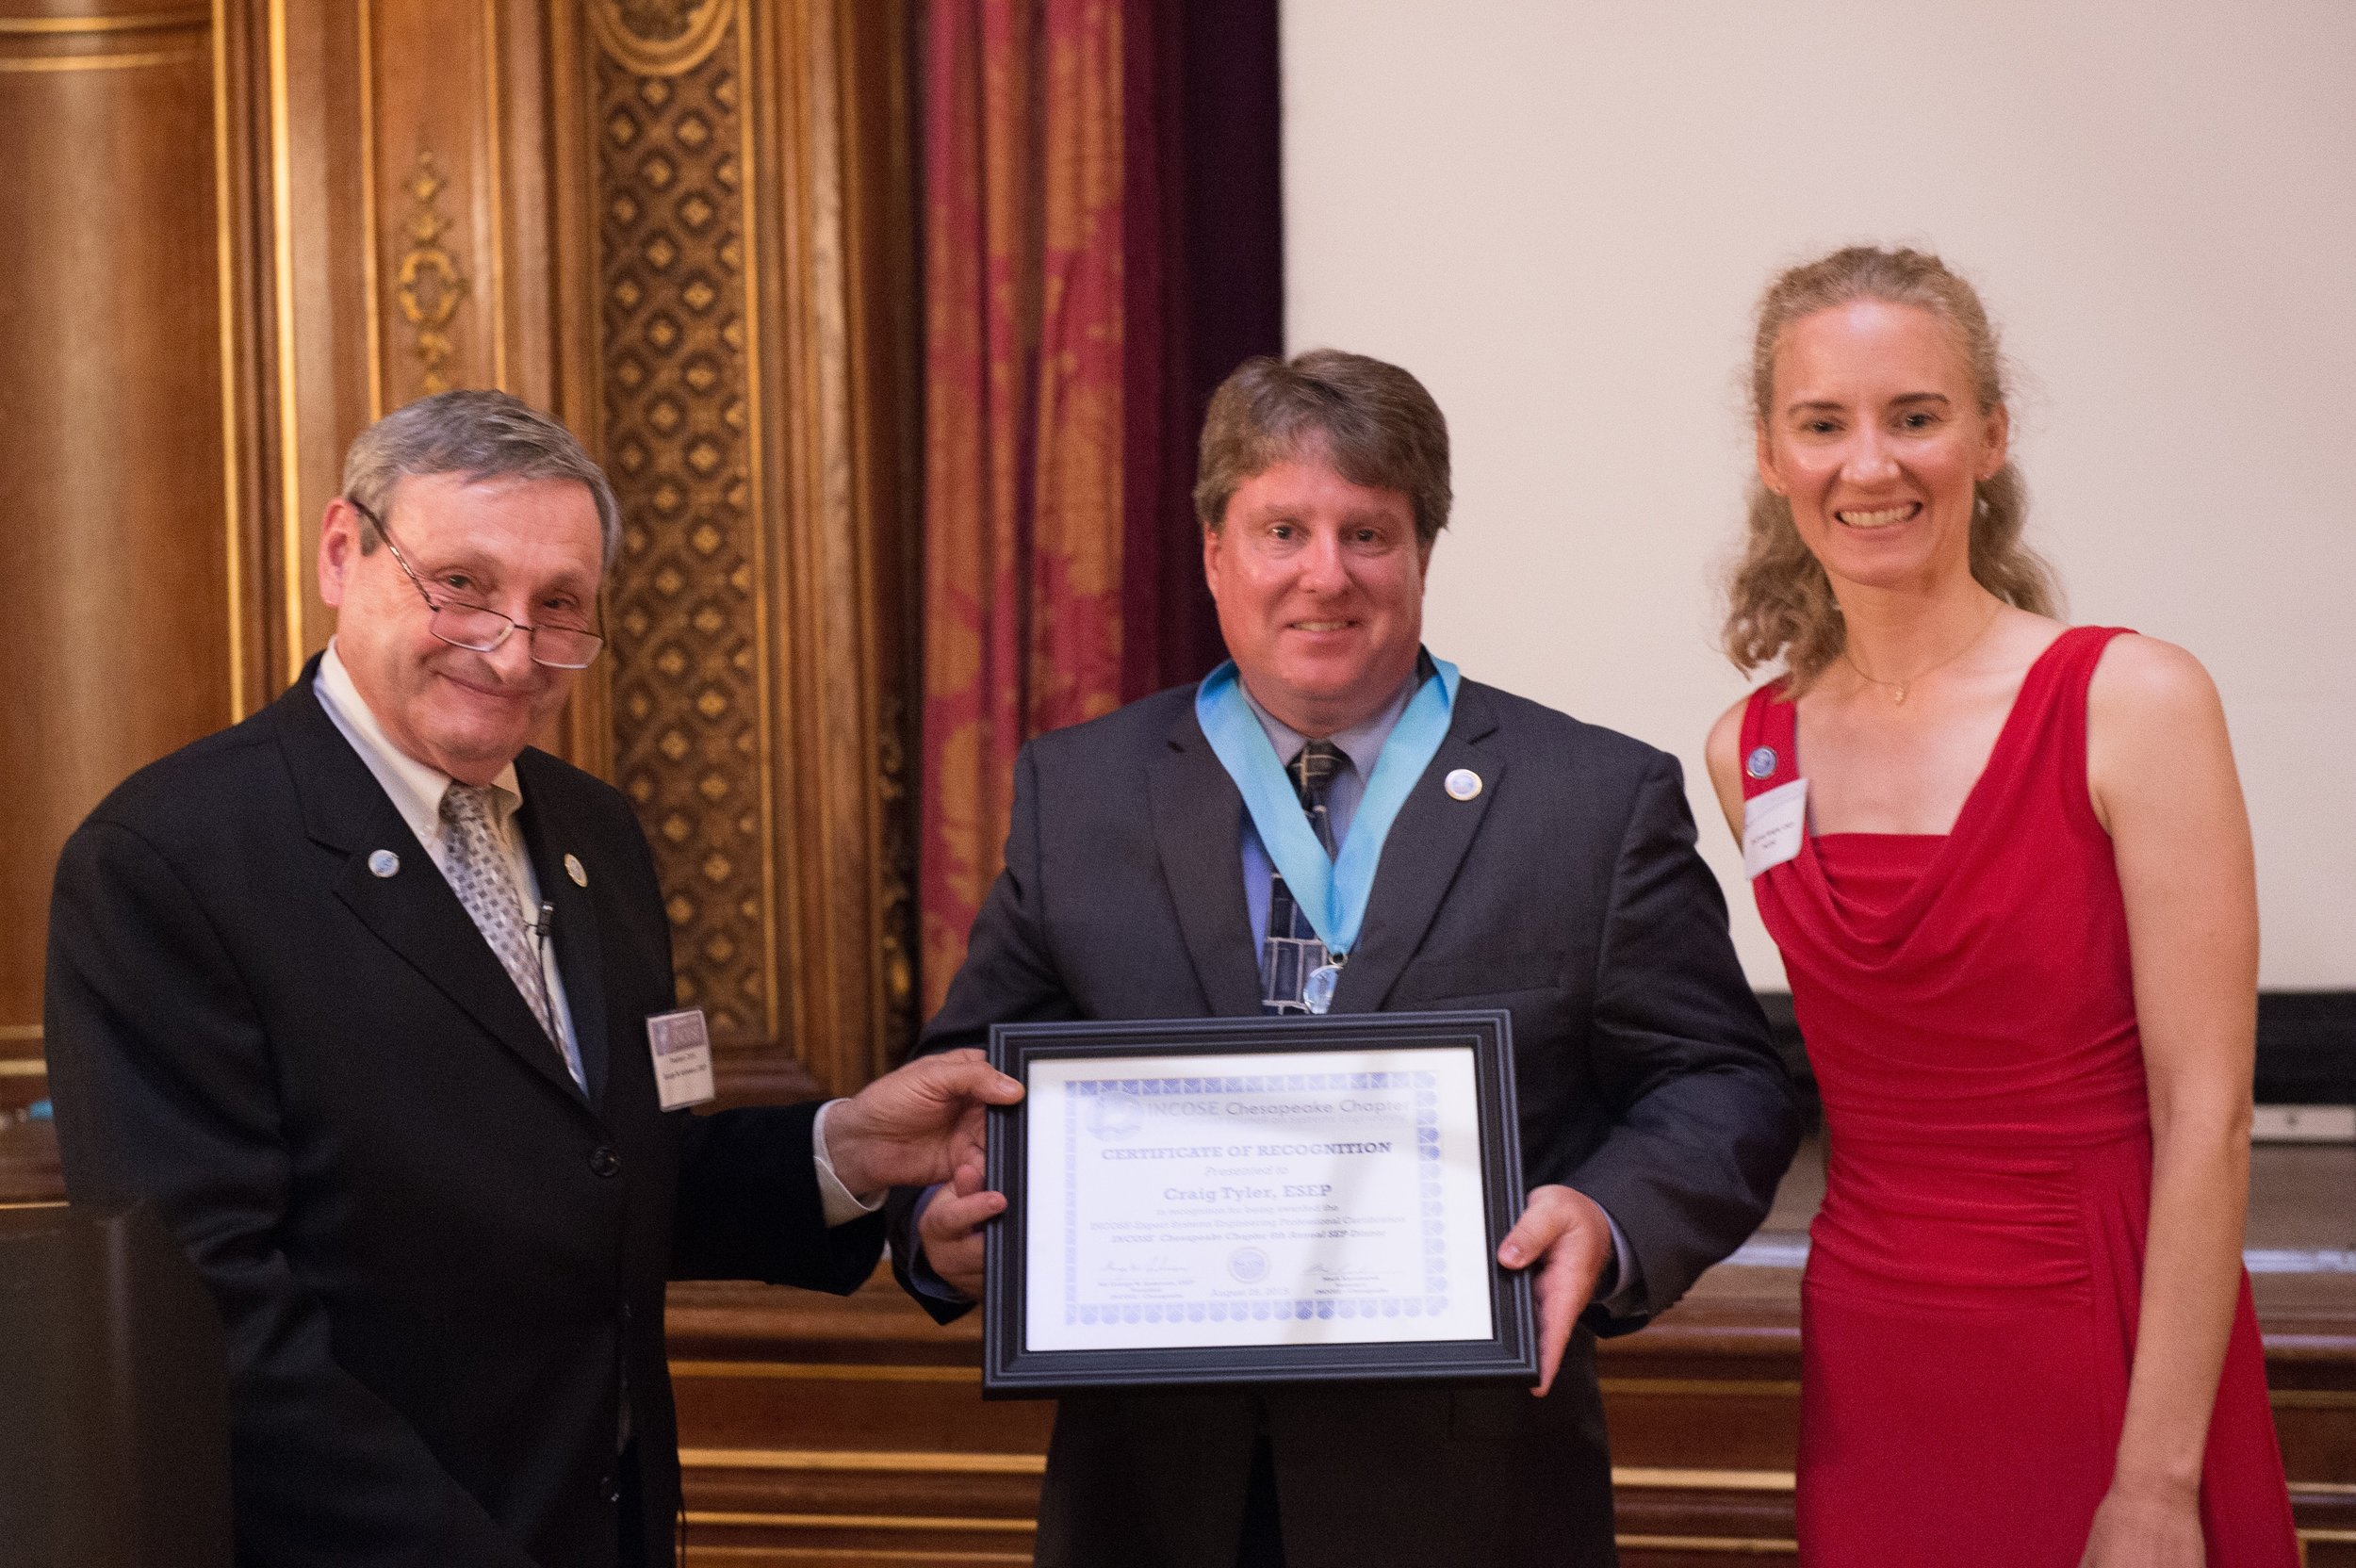 Craig Tyler receives his ESEP Recognition Certificate from George Anderson and Courtney Wright